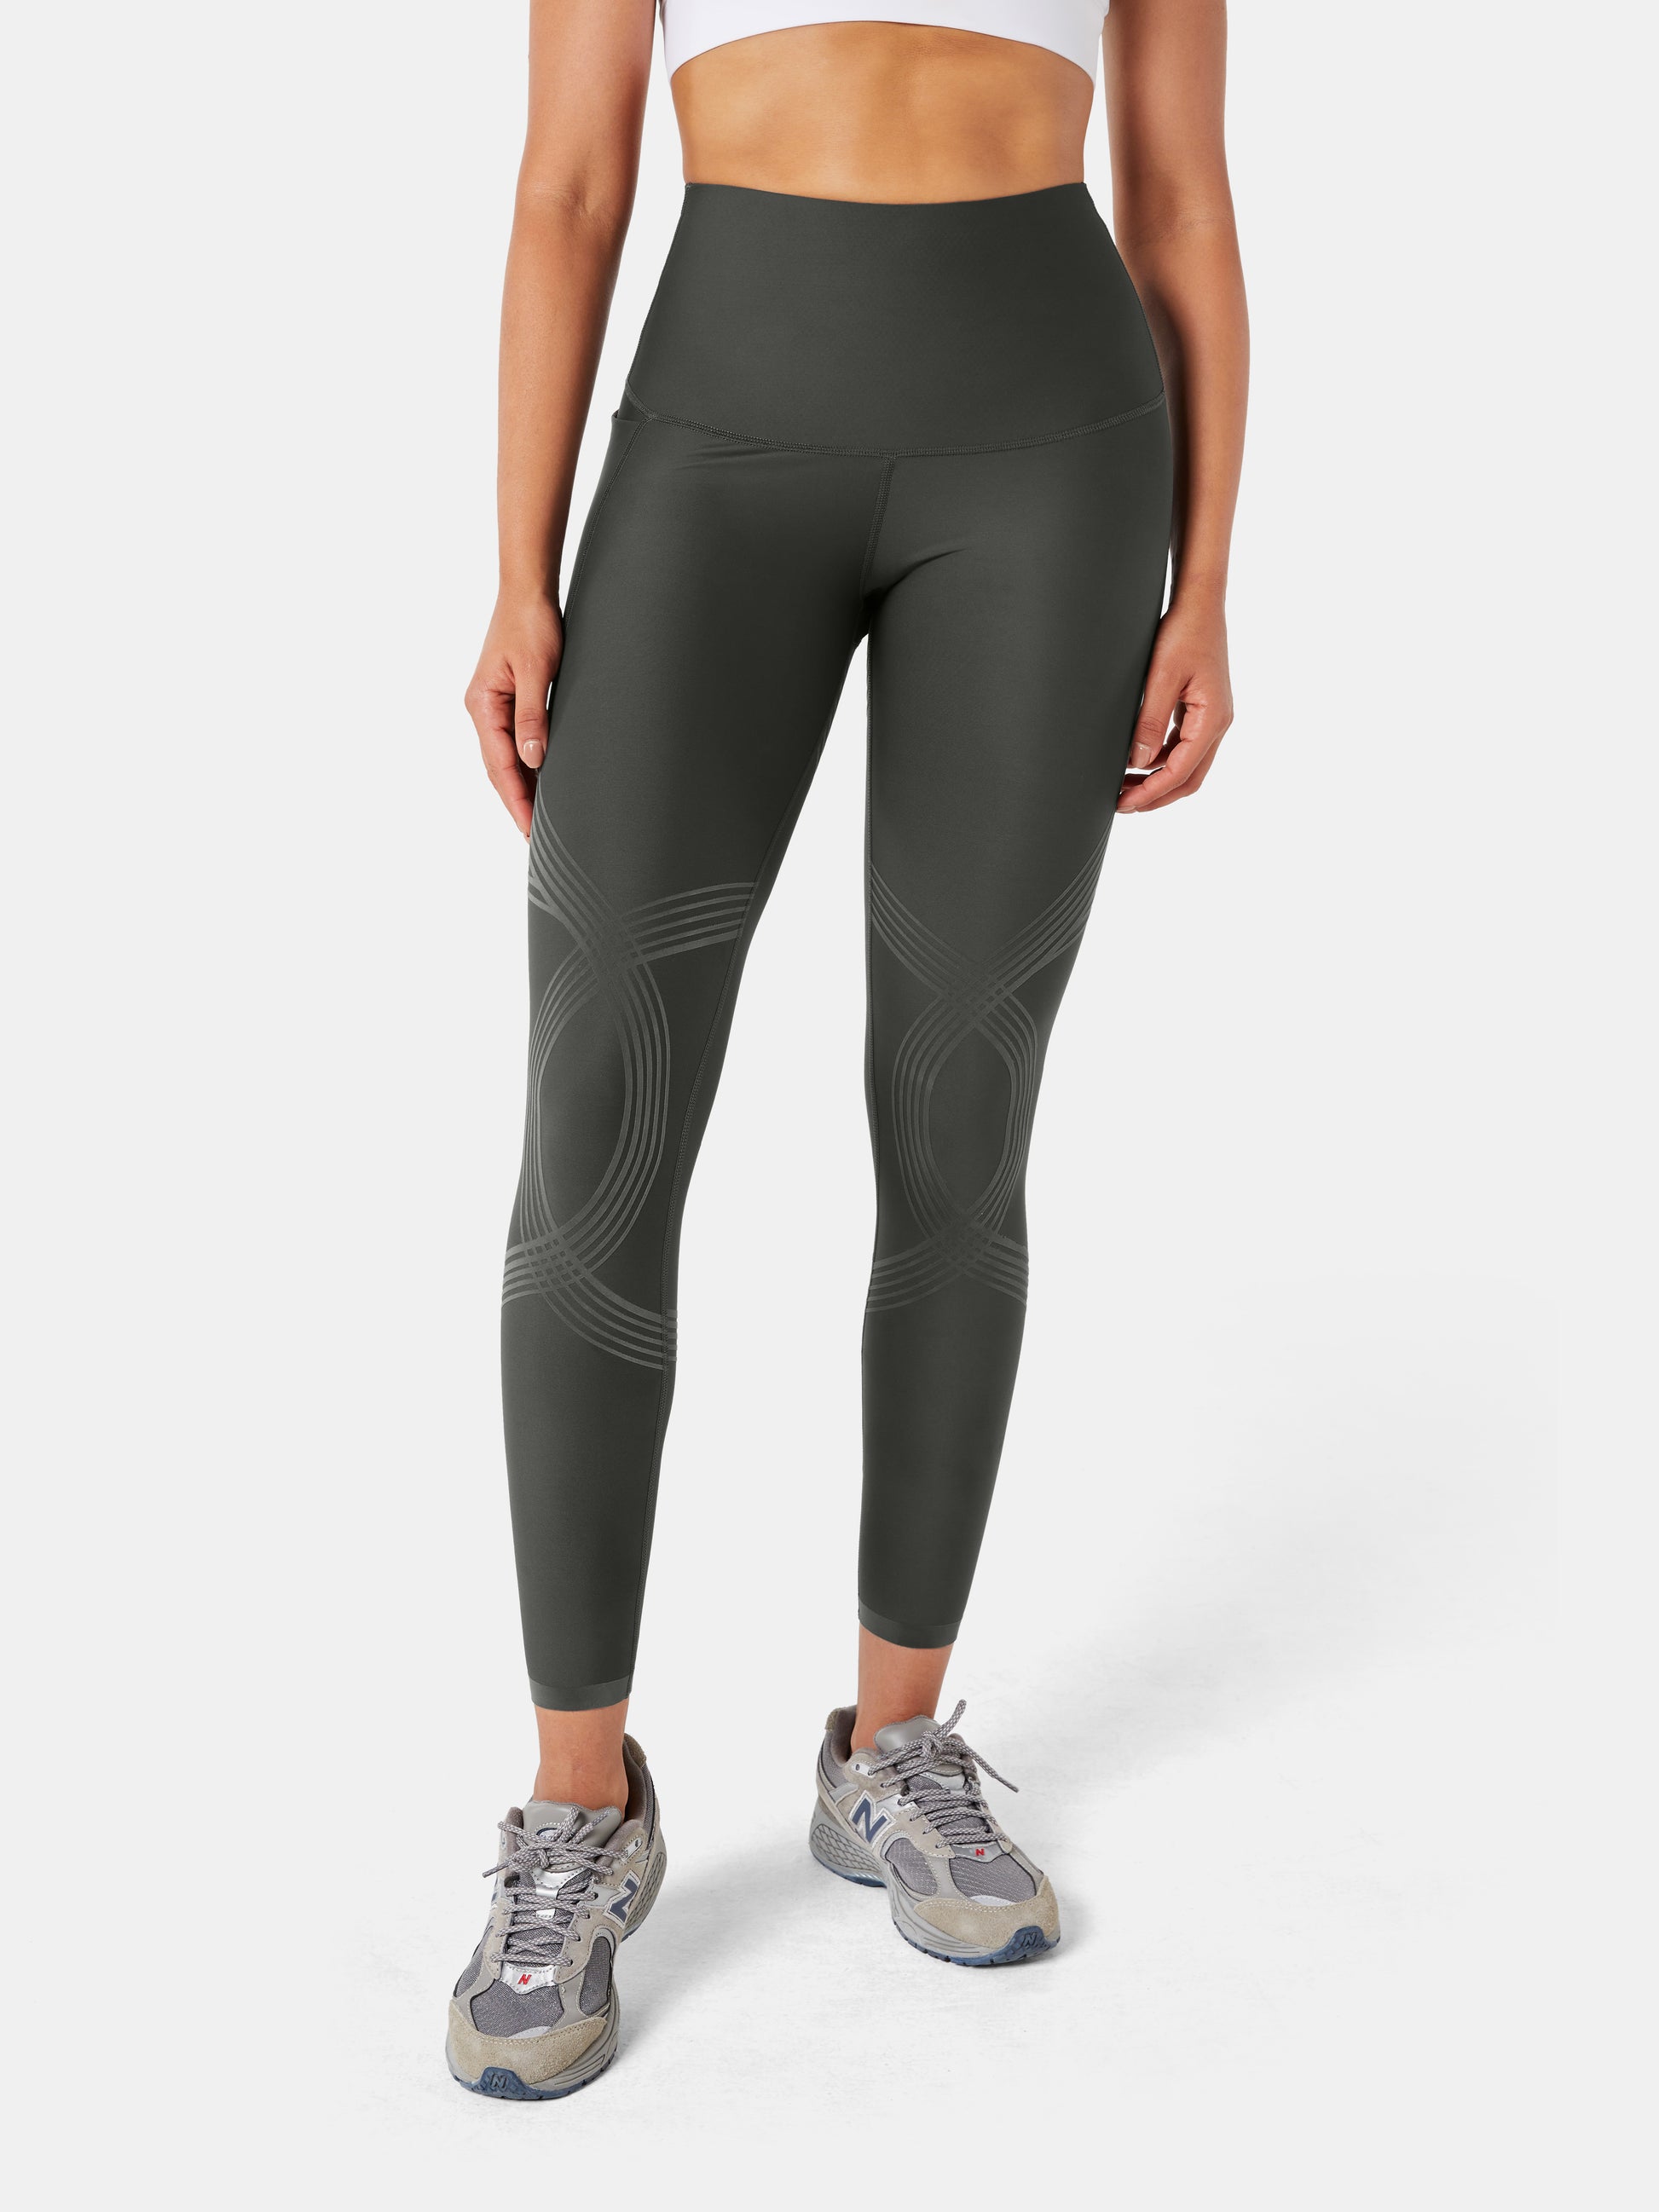 Buy Core Leggings, Fast Delivery